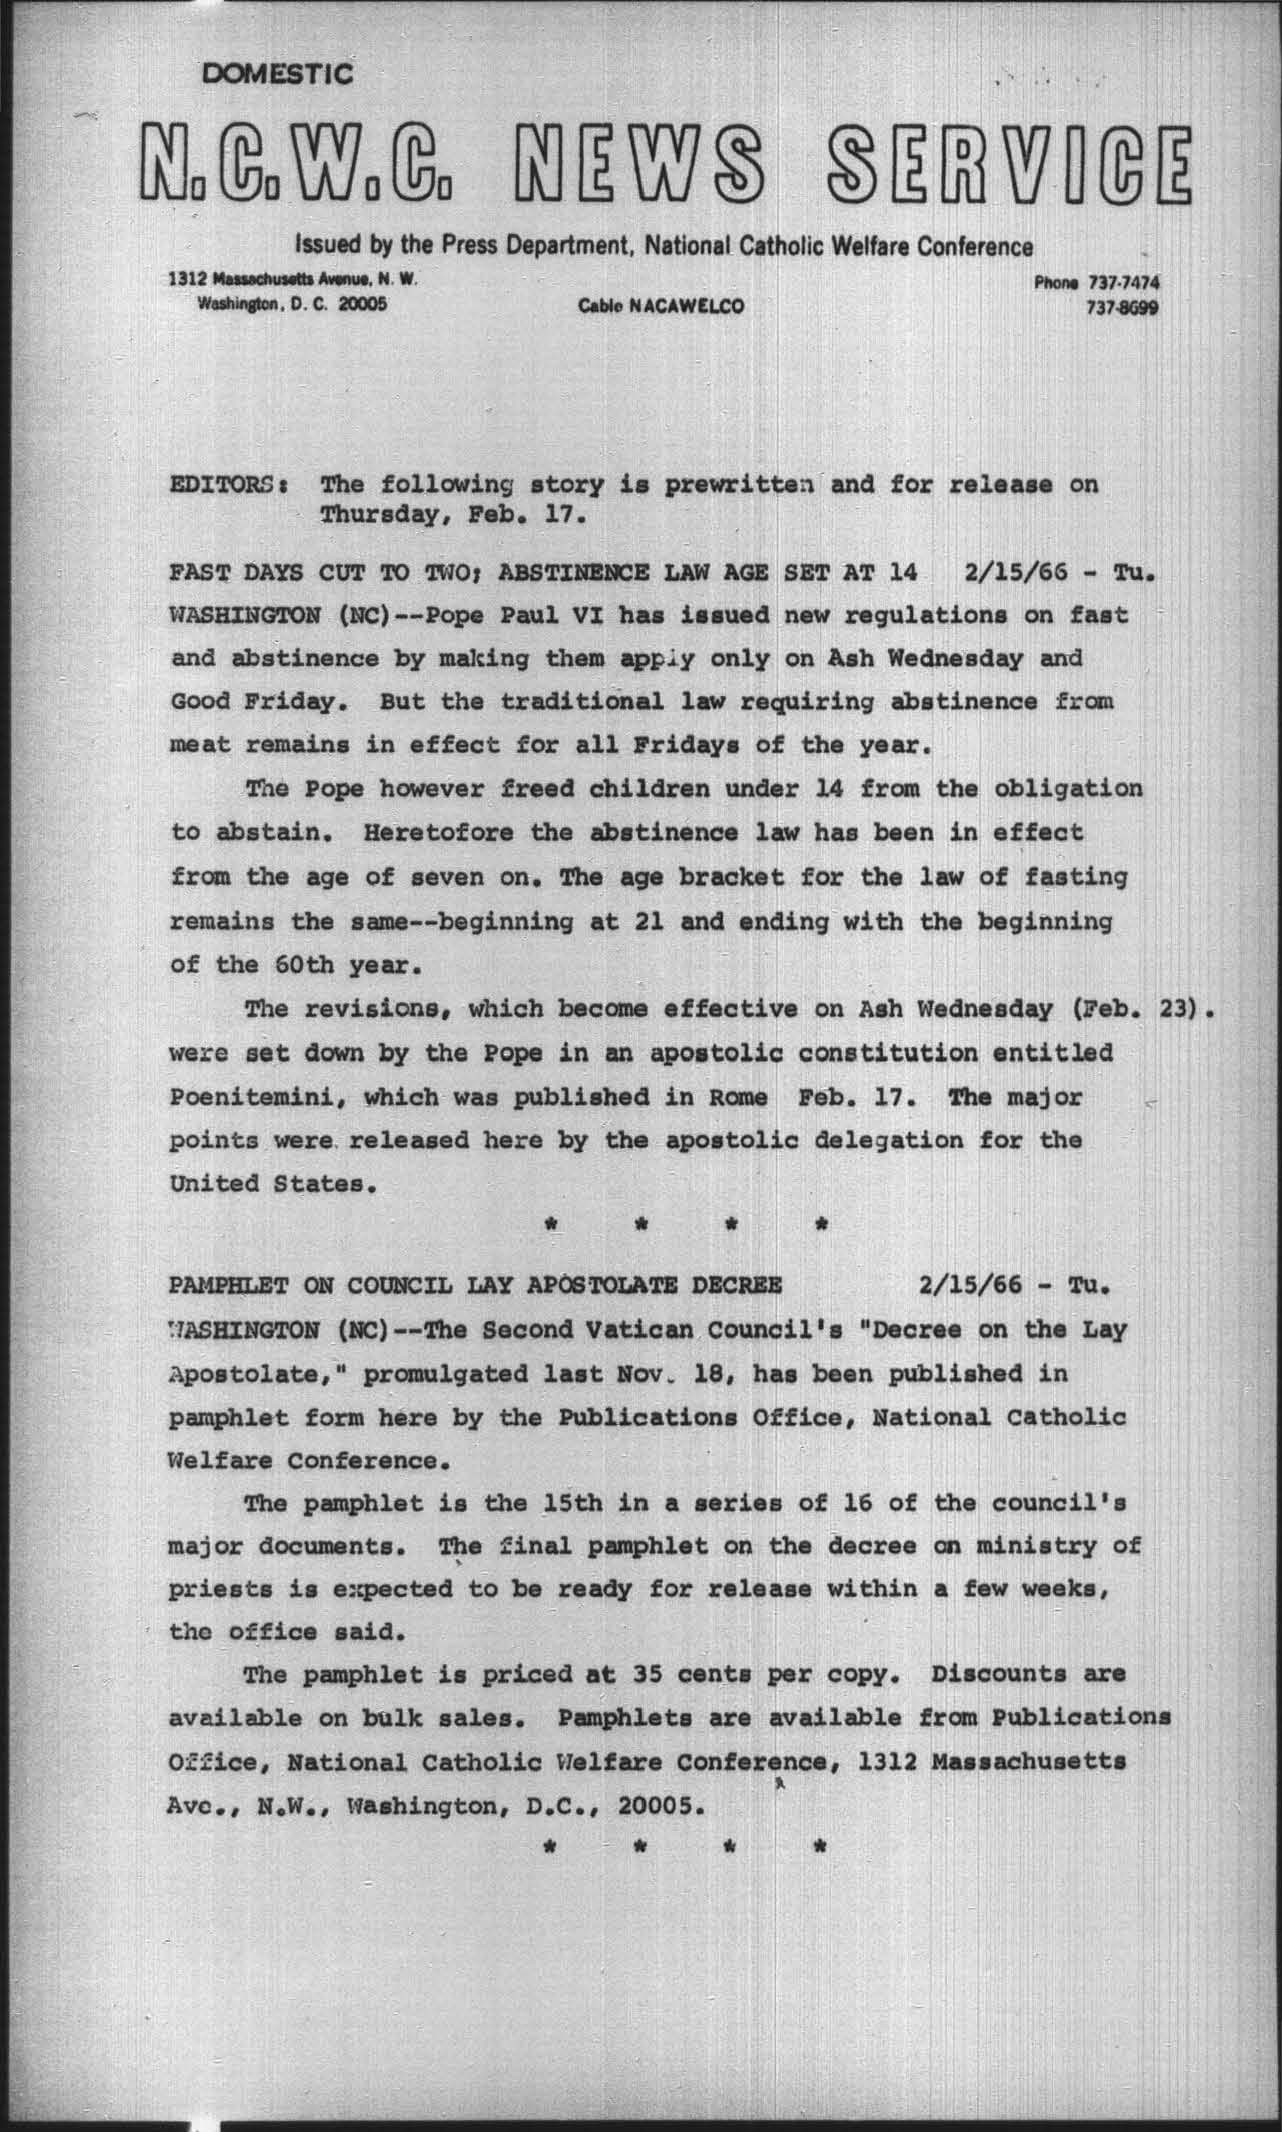 News from the National Catholic Welfare Conference, Feb. 15, 1966 (first page)